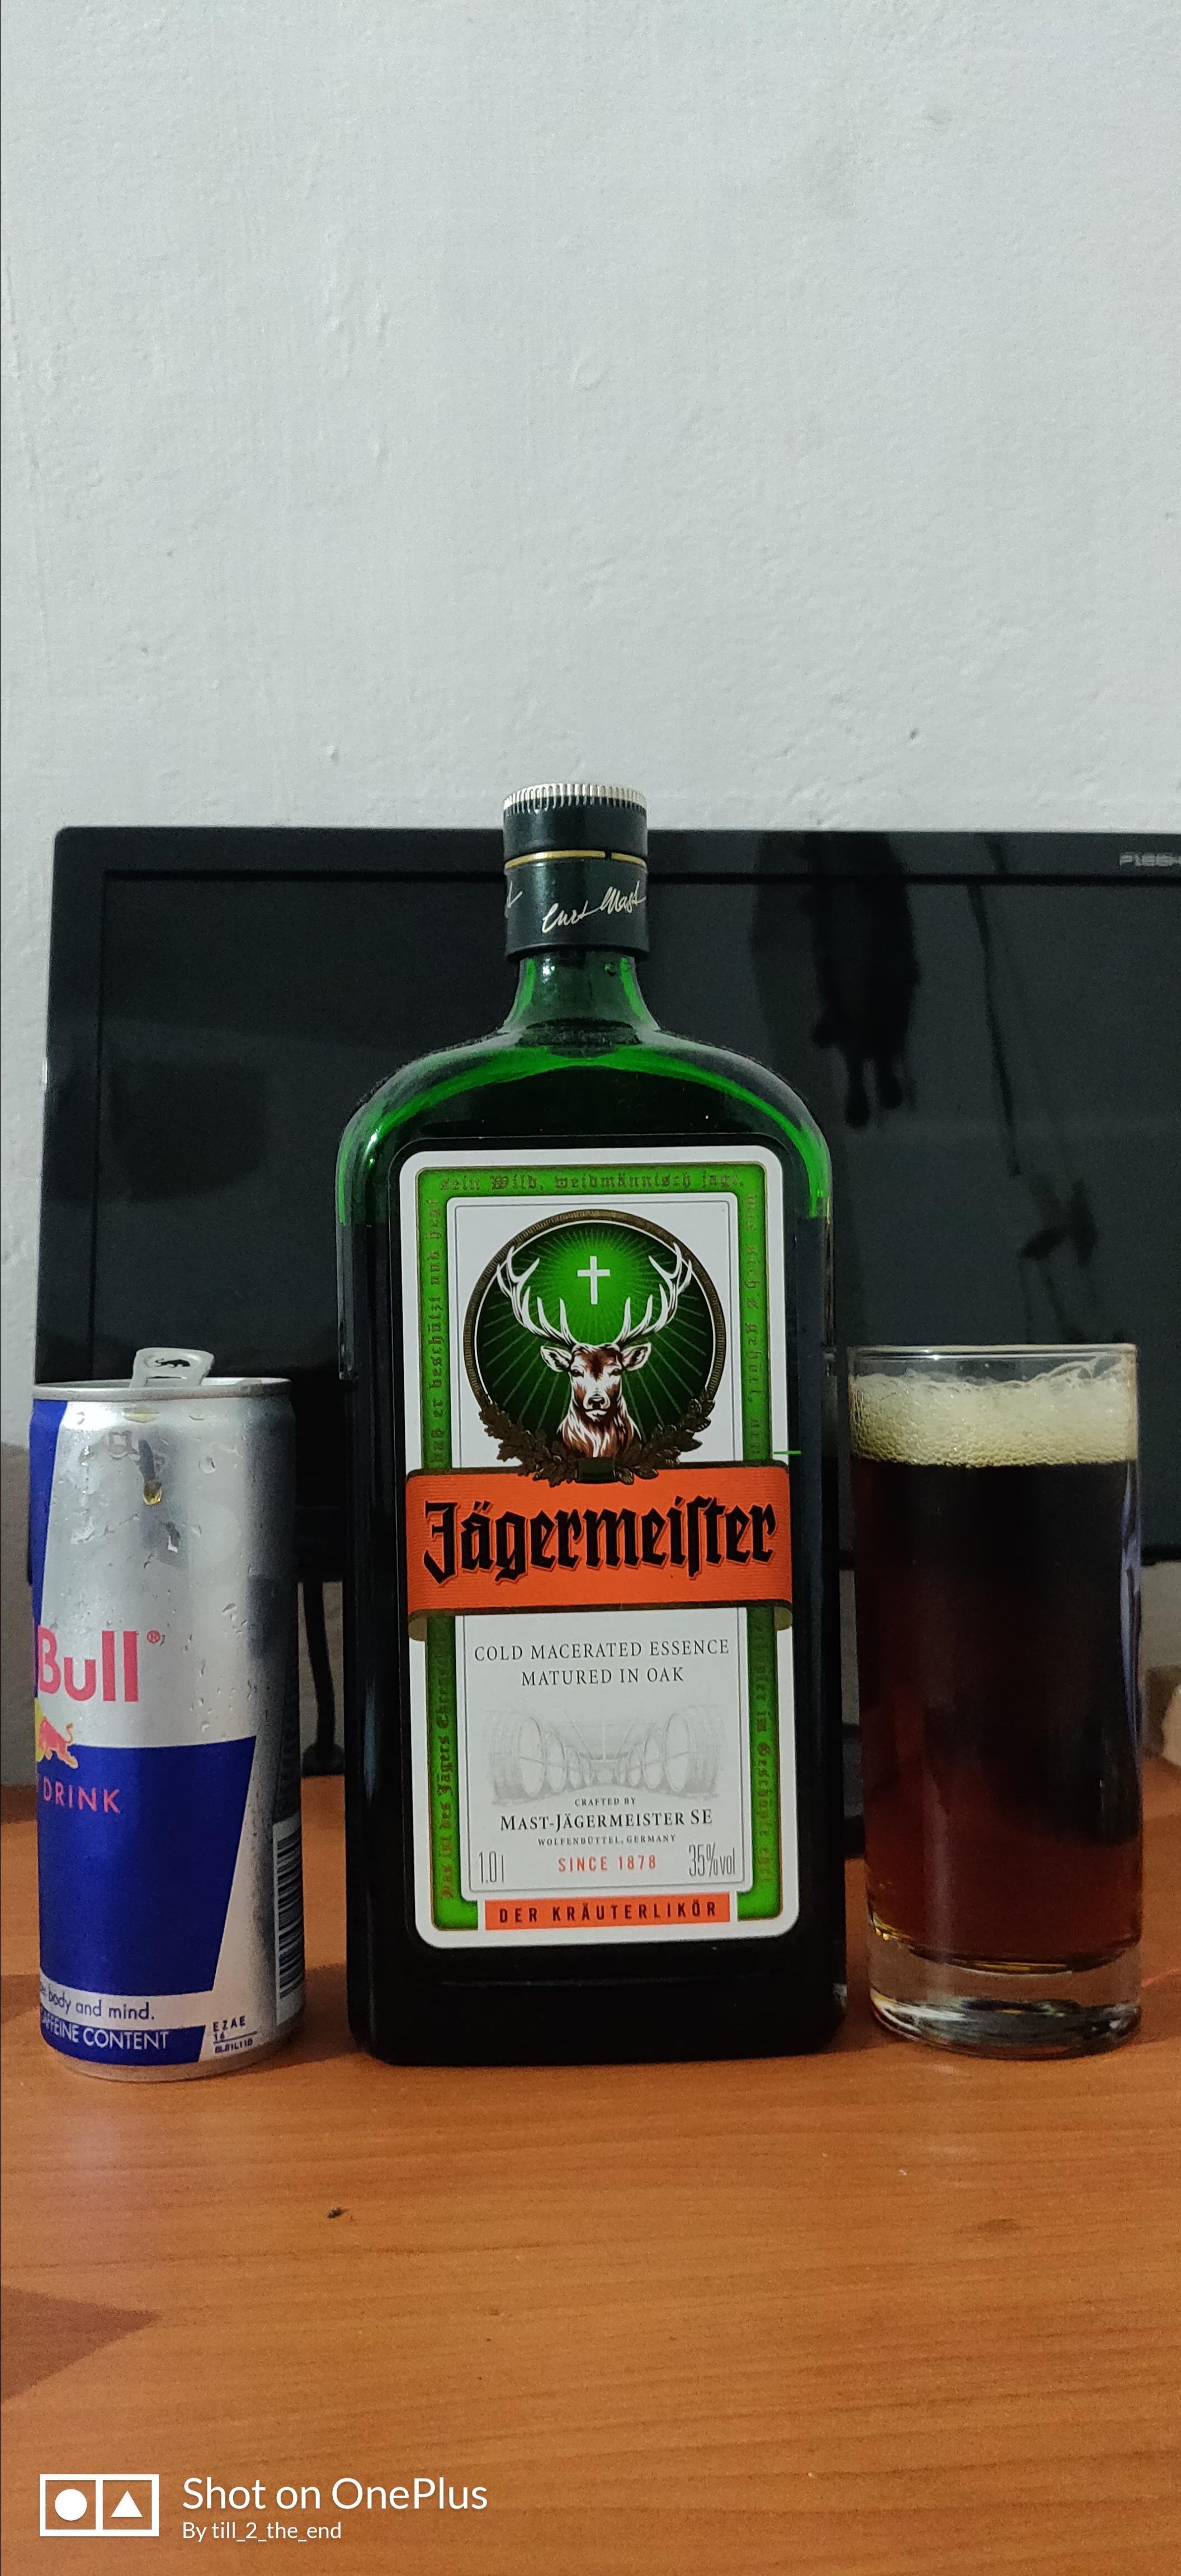 Jager Bomb image